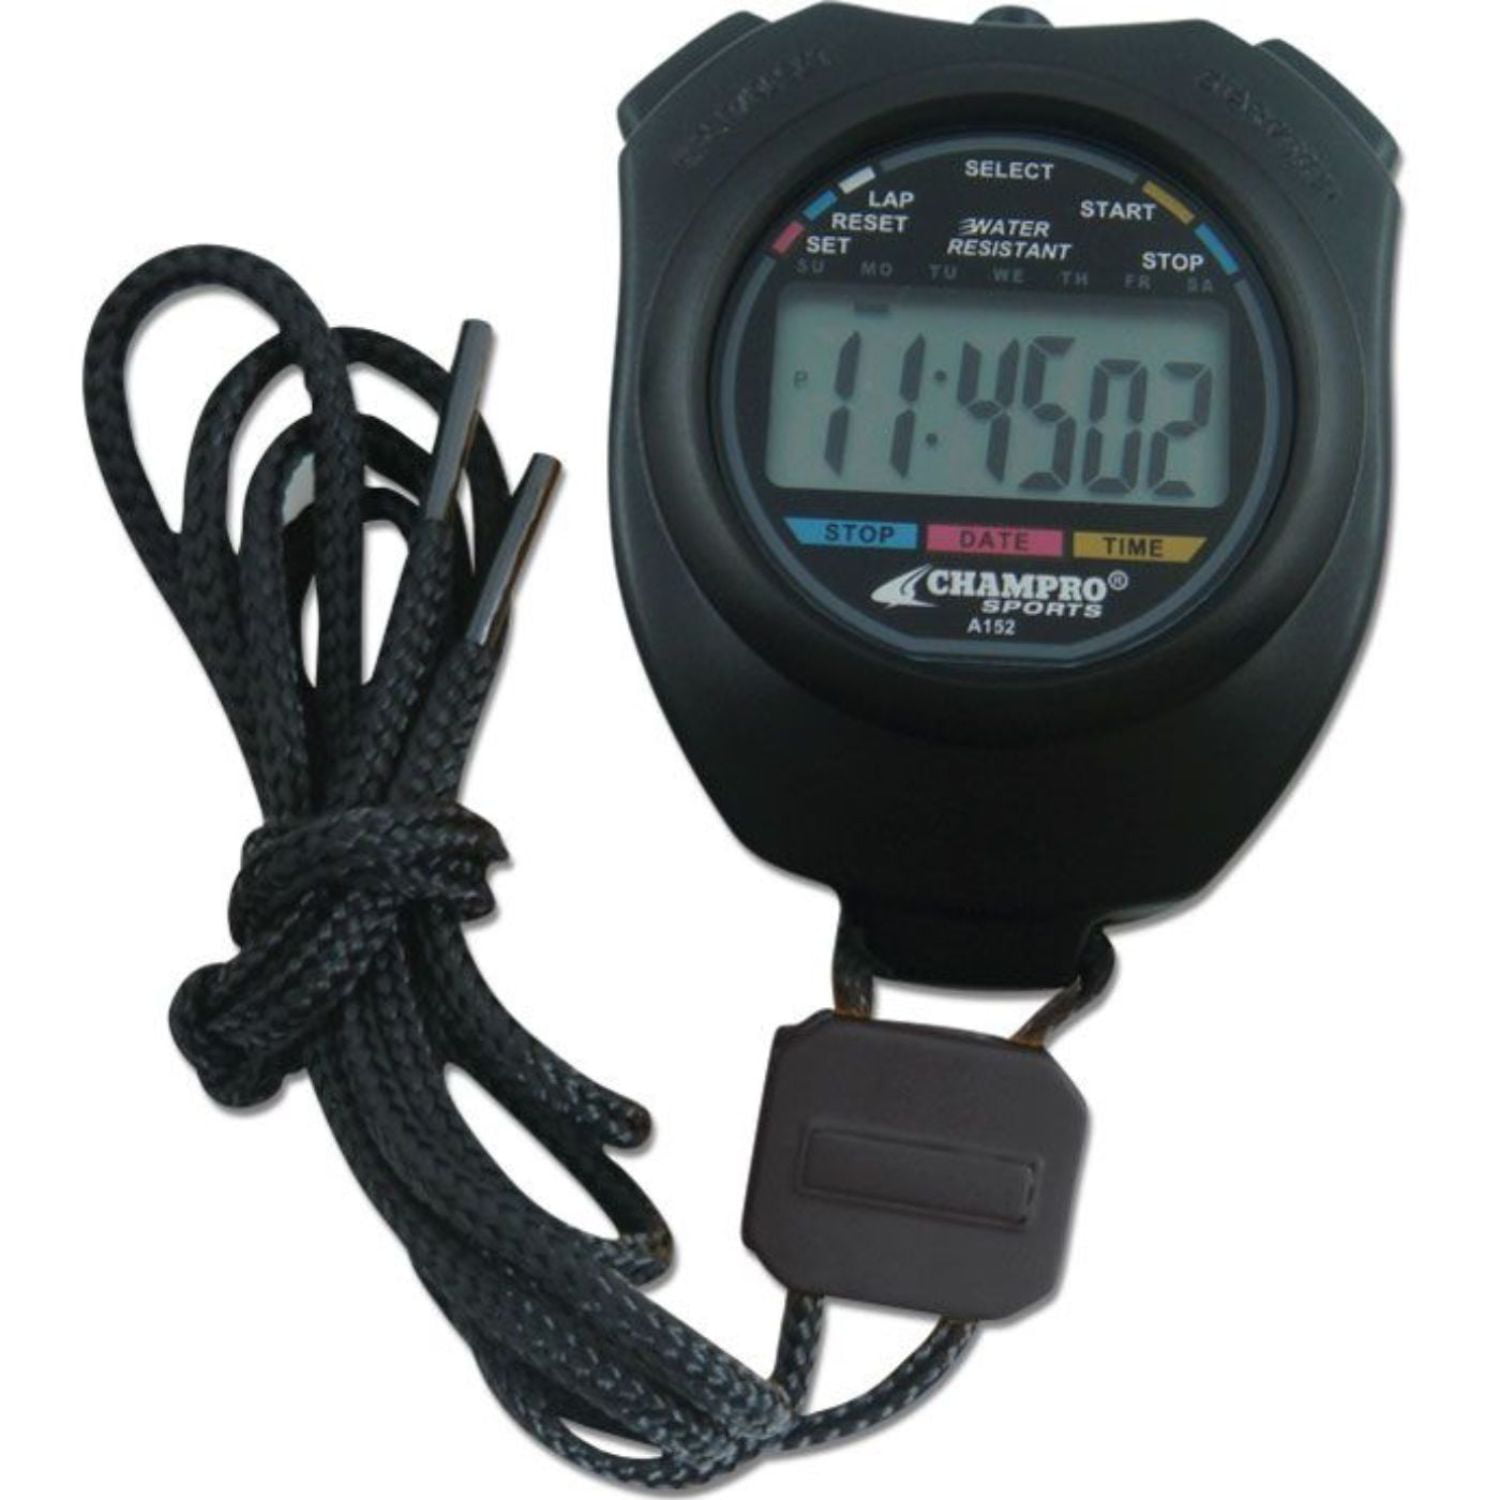 Luckystone Digital Professional Handheld LCD Chronograph Water Resistant Sports for sale online 